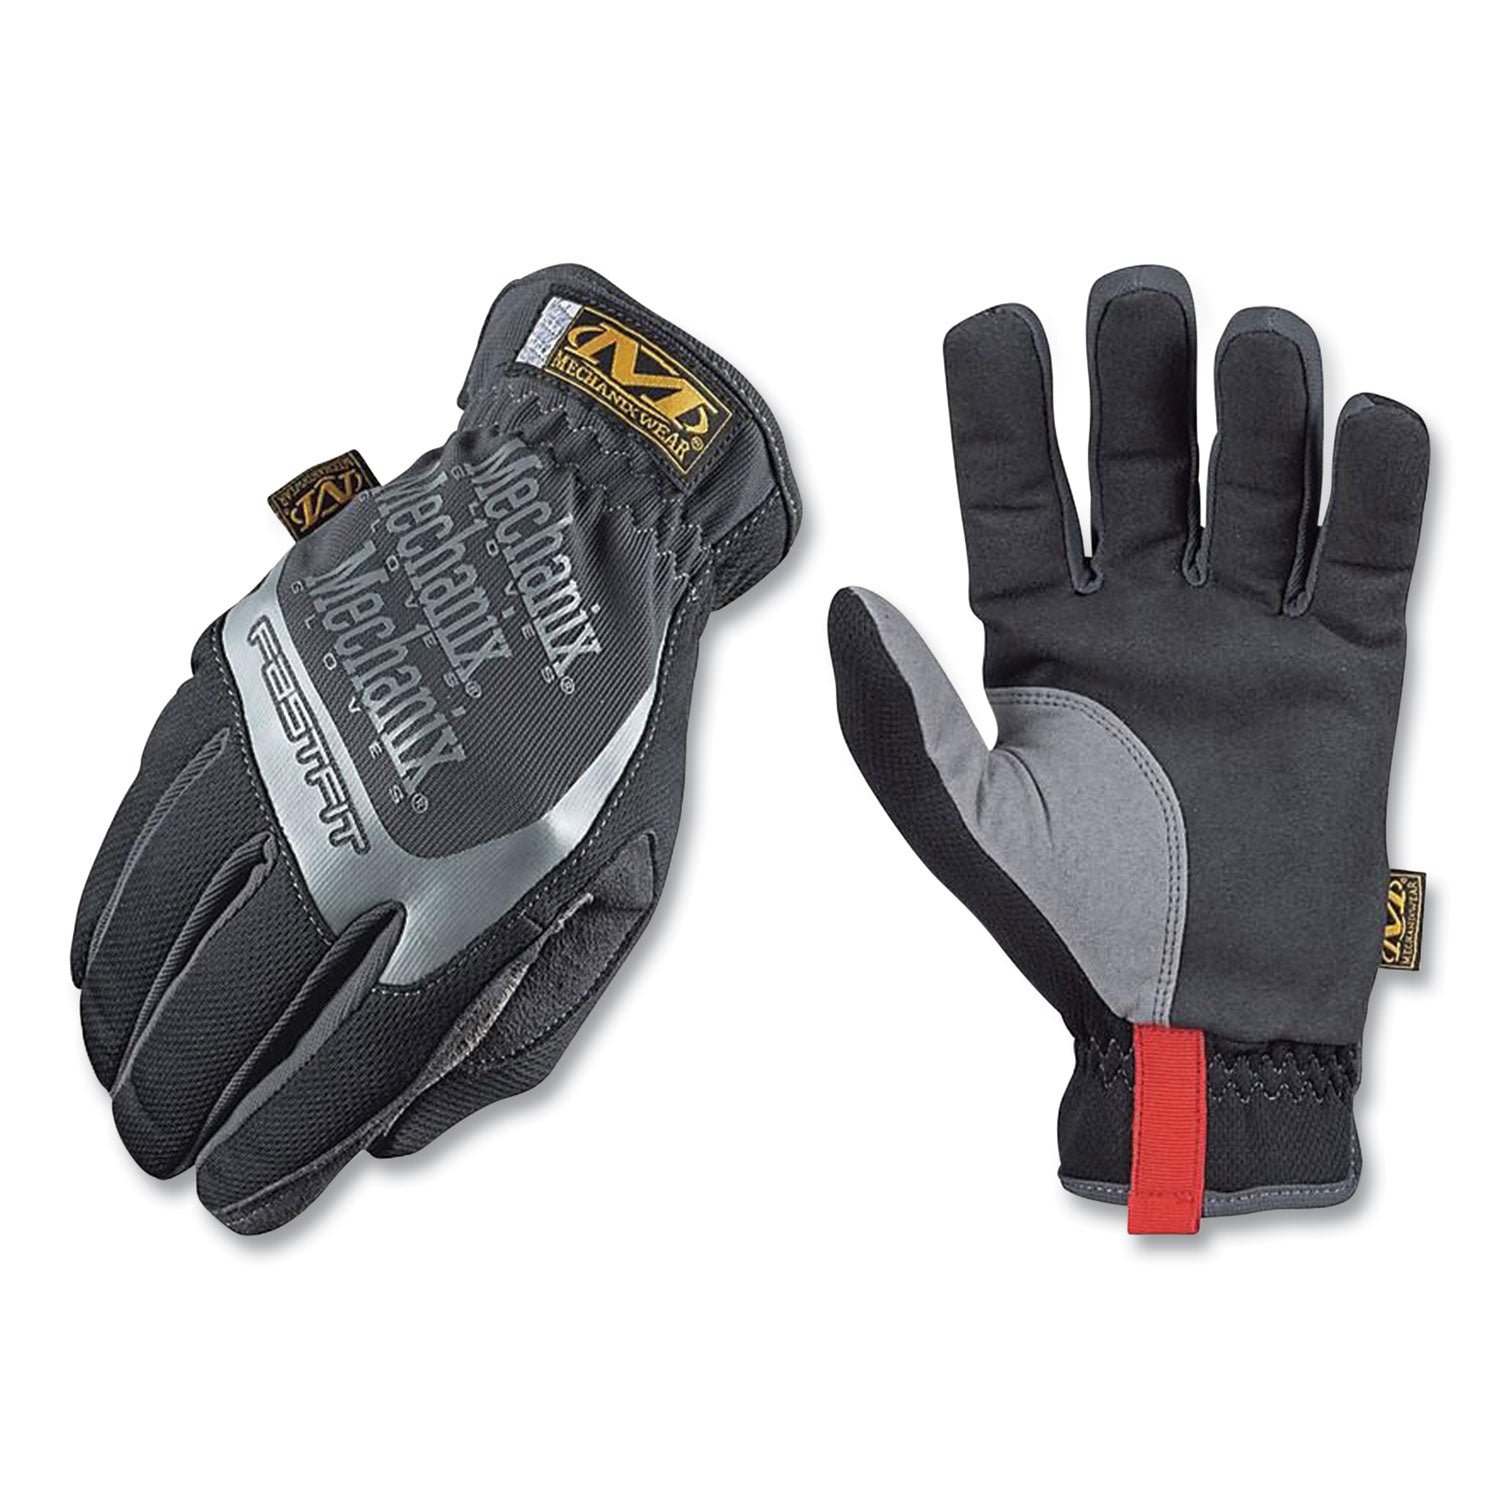 fastfit-work-gloves-black-gray-large_rtsmff05010 - 2